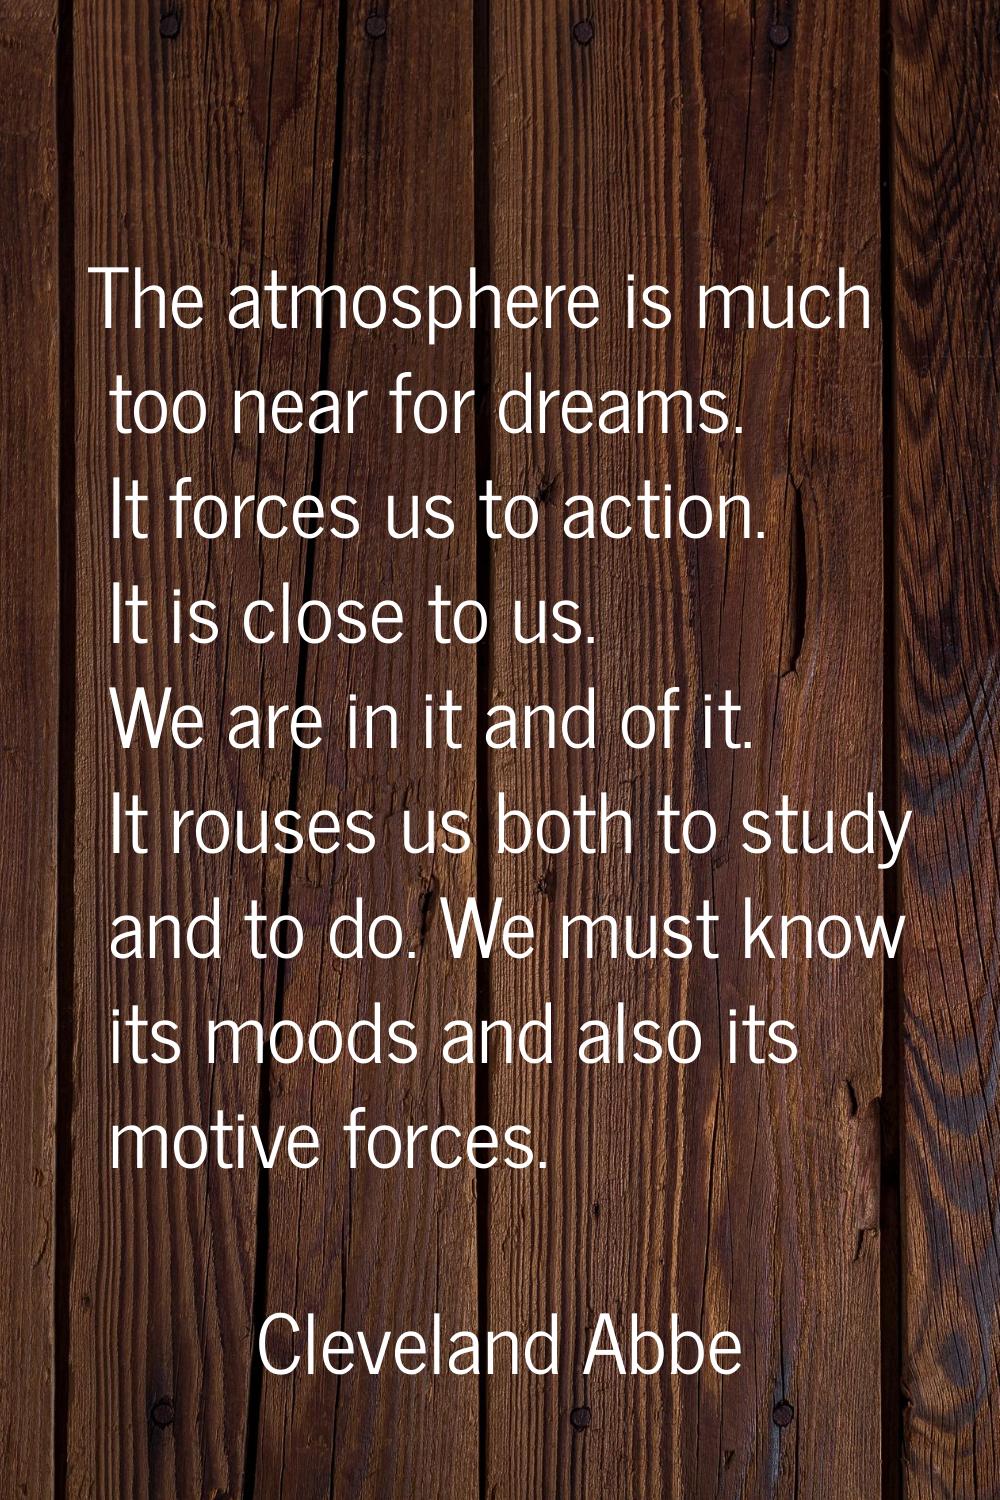 The atmosphere is much too near for dreams. It forces us to action. It is close to us. We are in it